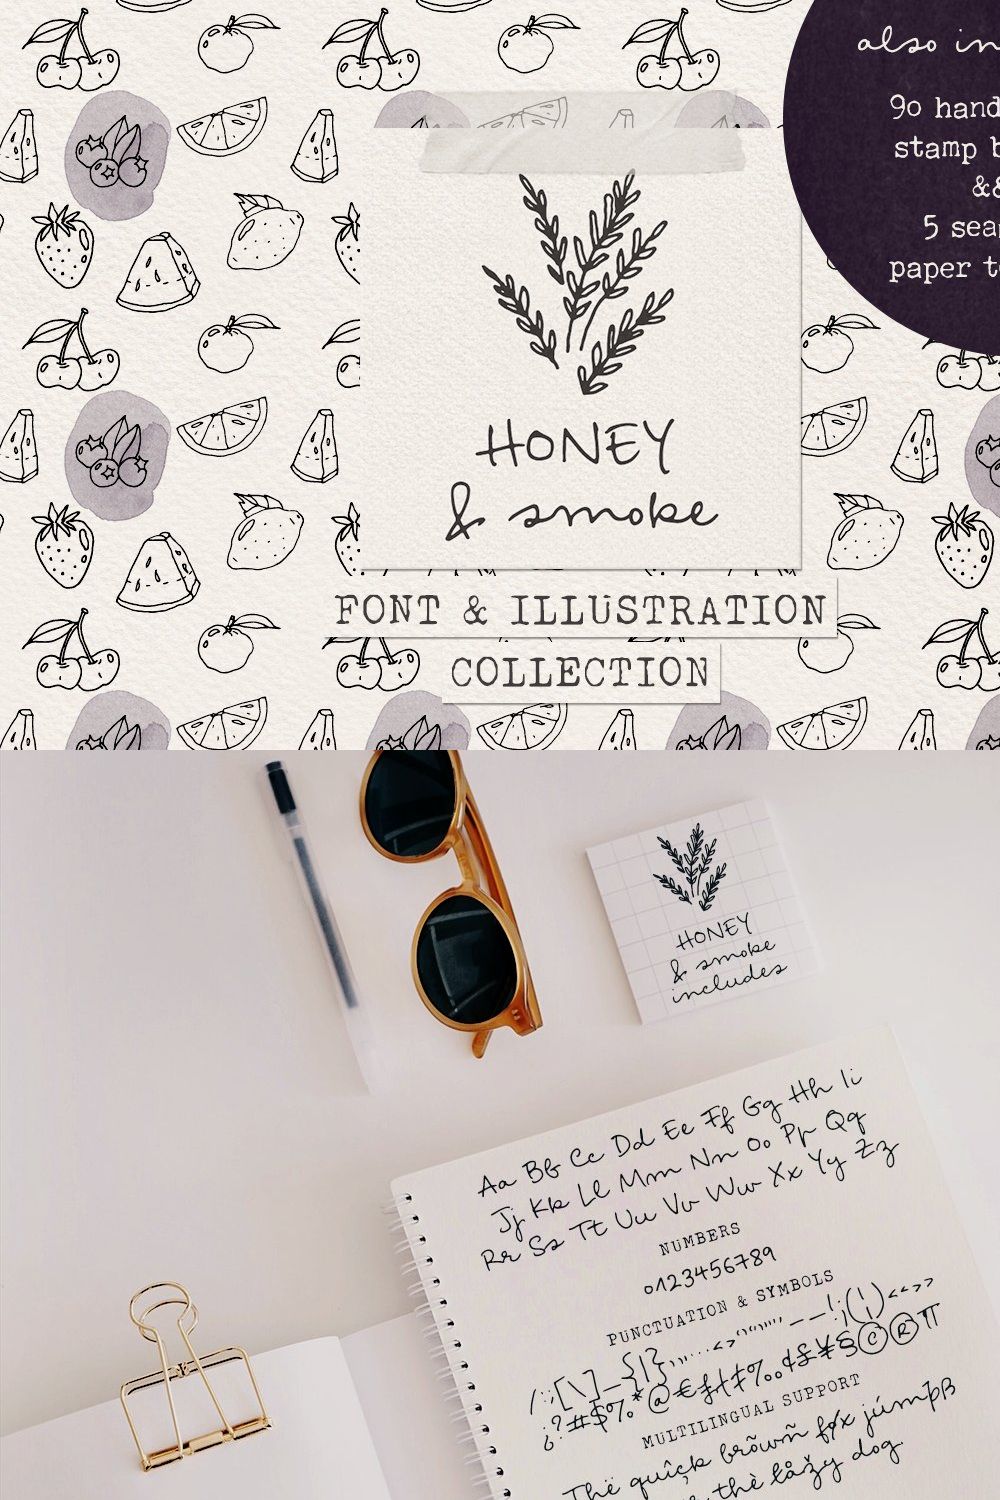 Honey & Smoke font collection pinterest preview image.